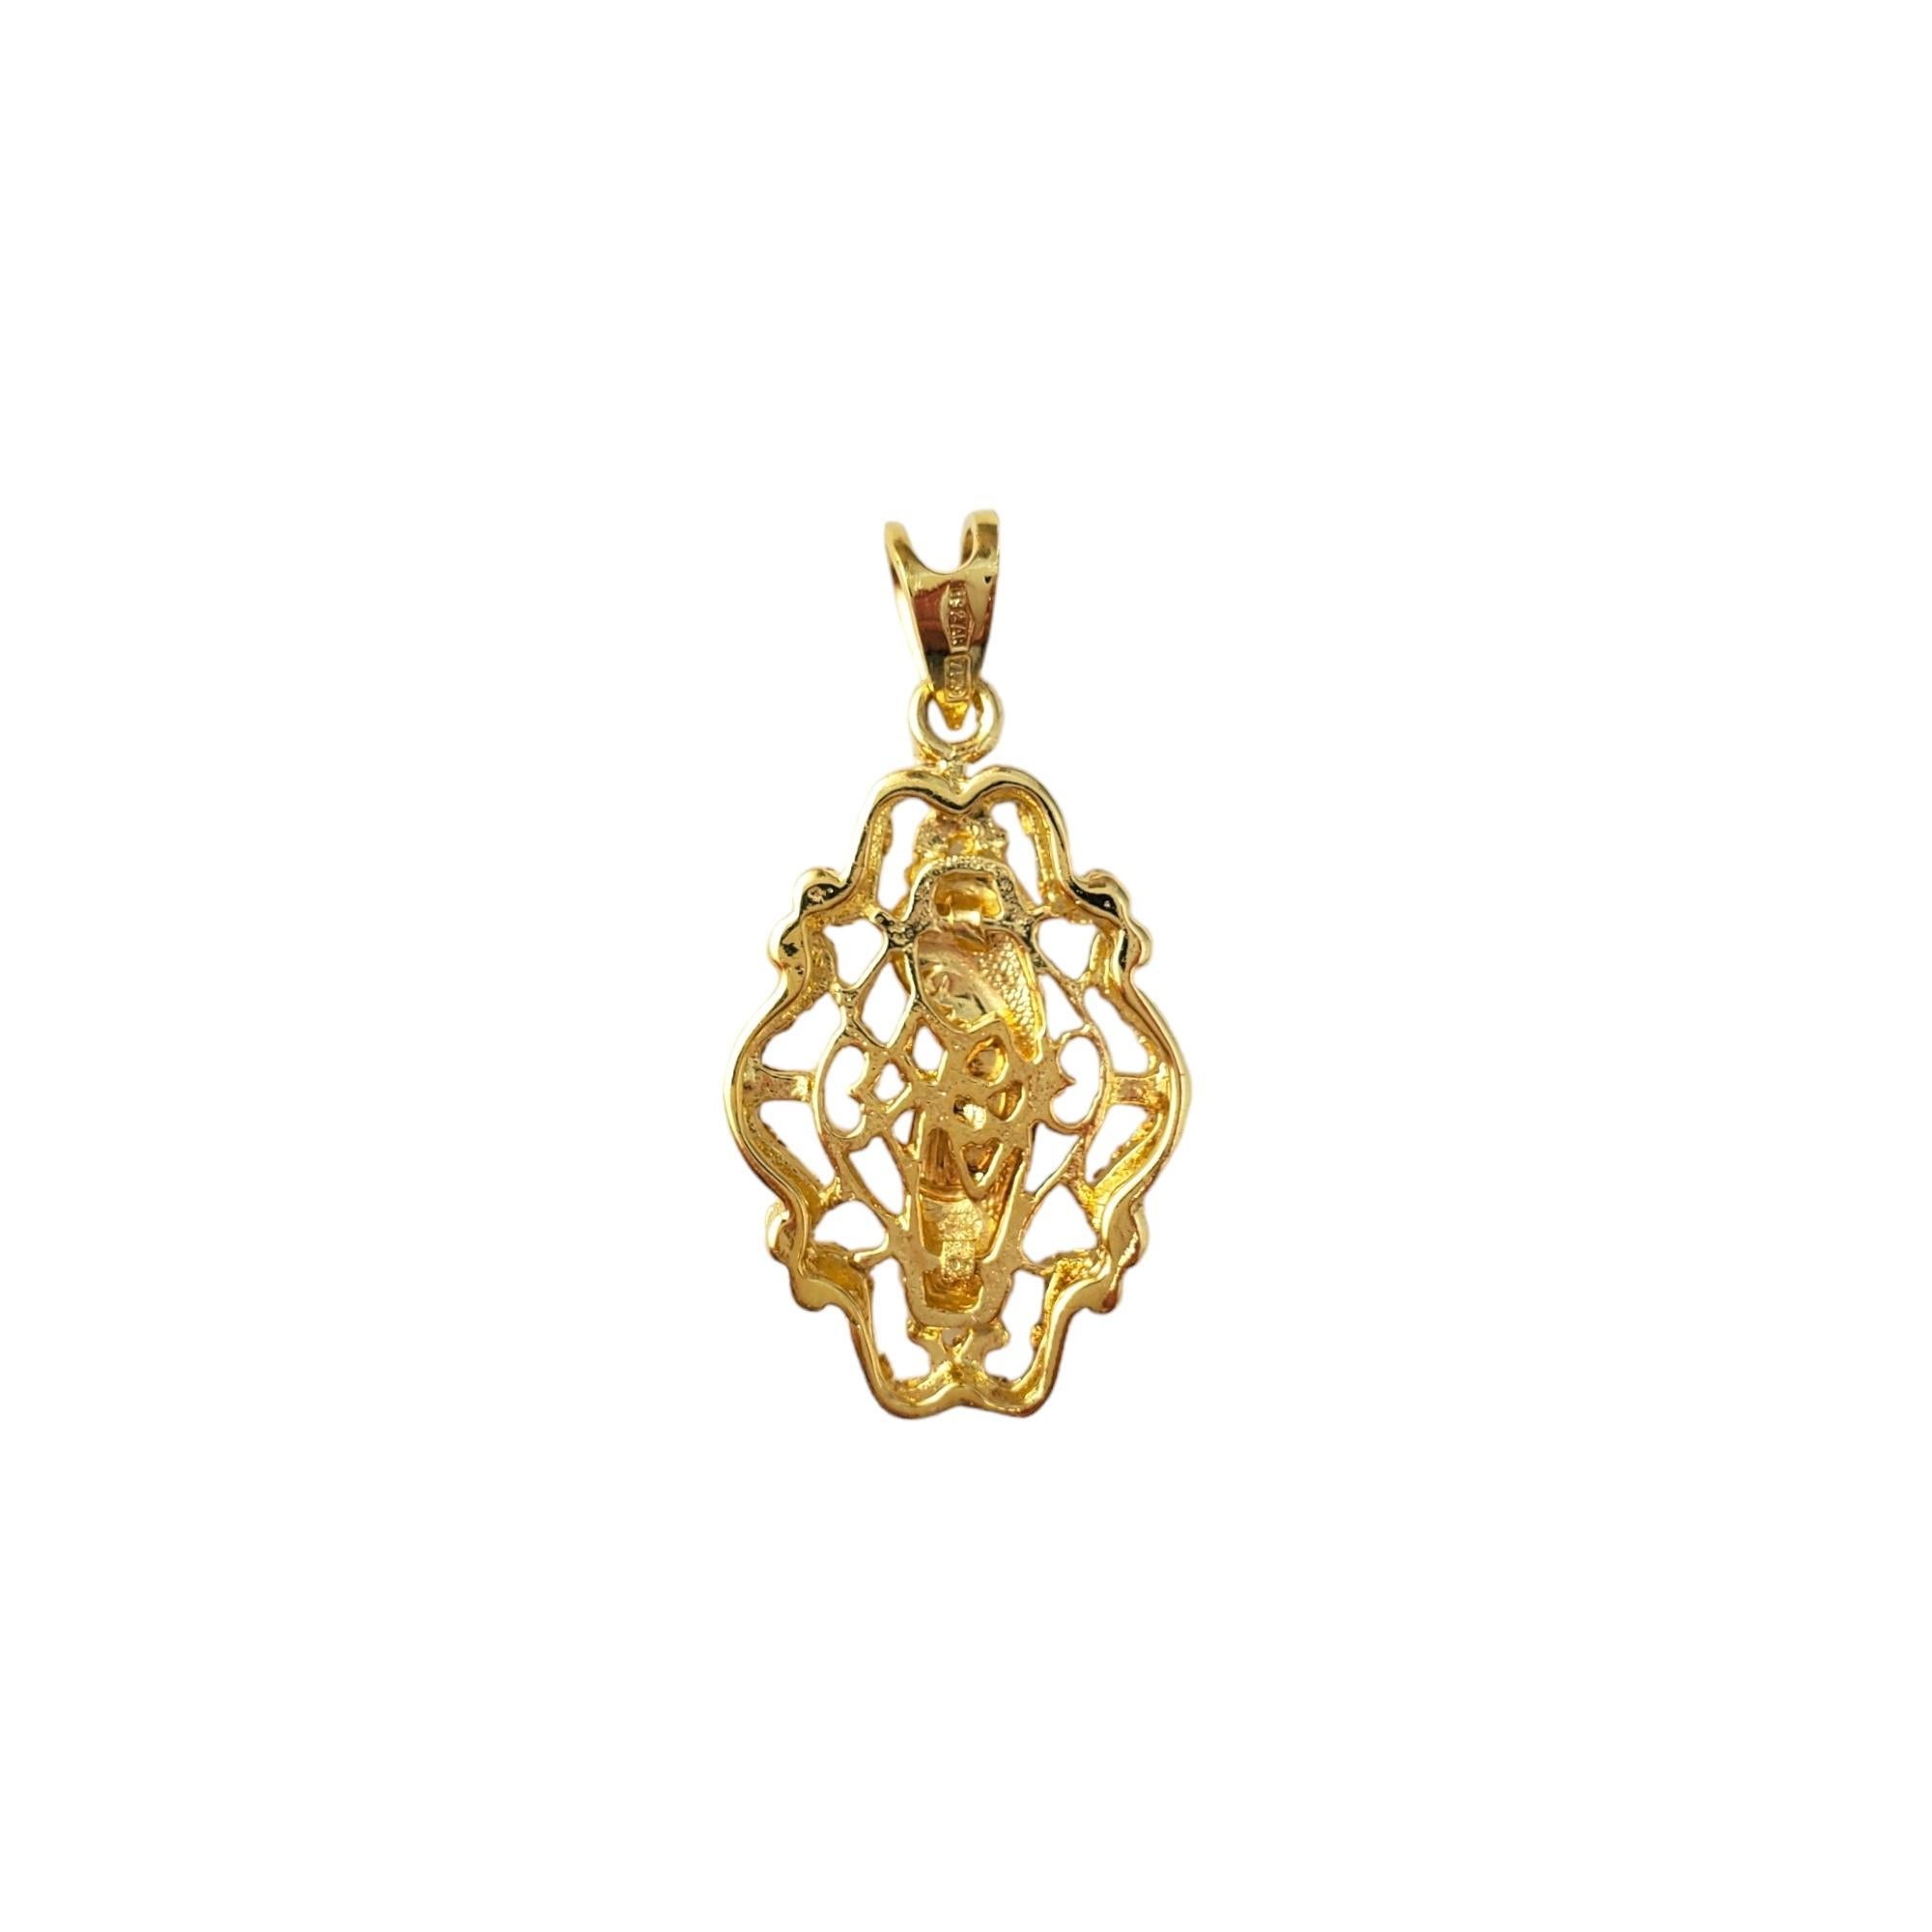 Vintage 18K Yellow Gold & Enamel Blessed Mother Pendant - 

This piece of jewelry signifies protection, faith and guidance. 

Pendant is set in yellow gold with blue and green enamel accents.

Size:  24.86mm X 16.04mm

Weight:  2.1 dwt. /  3.27